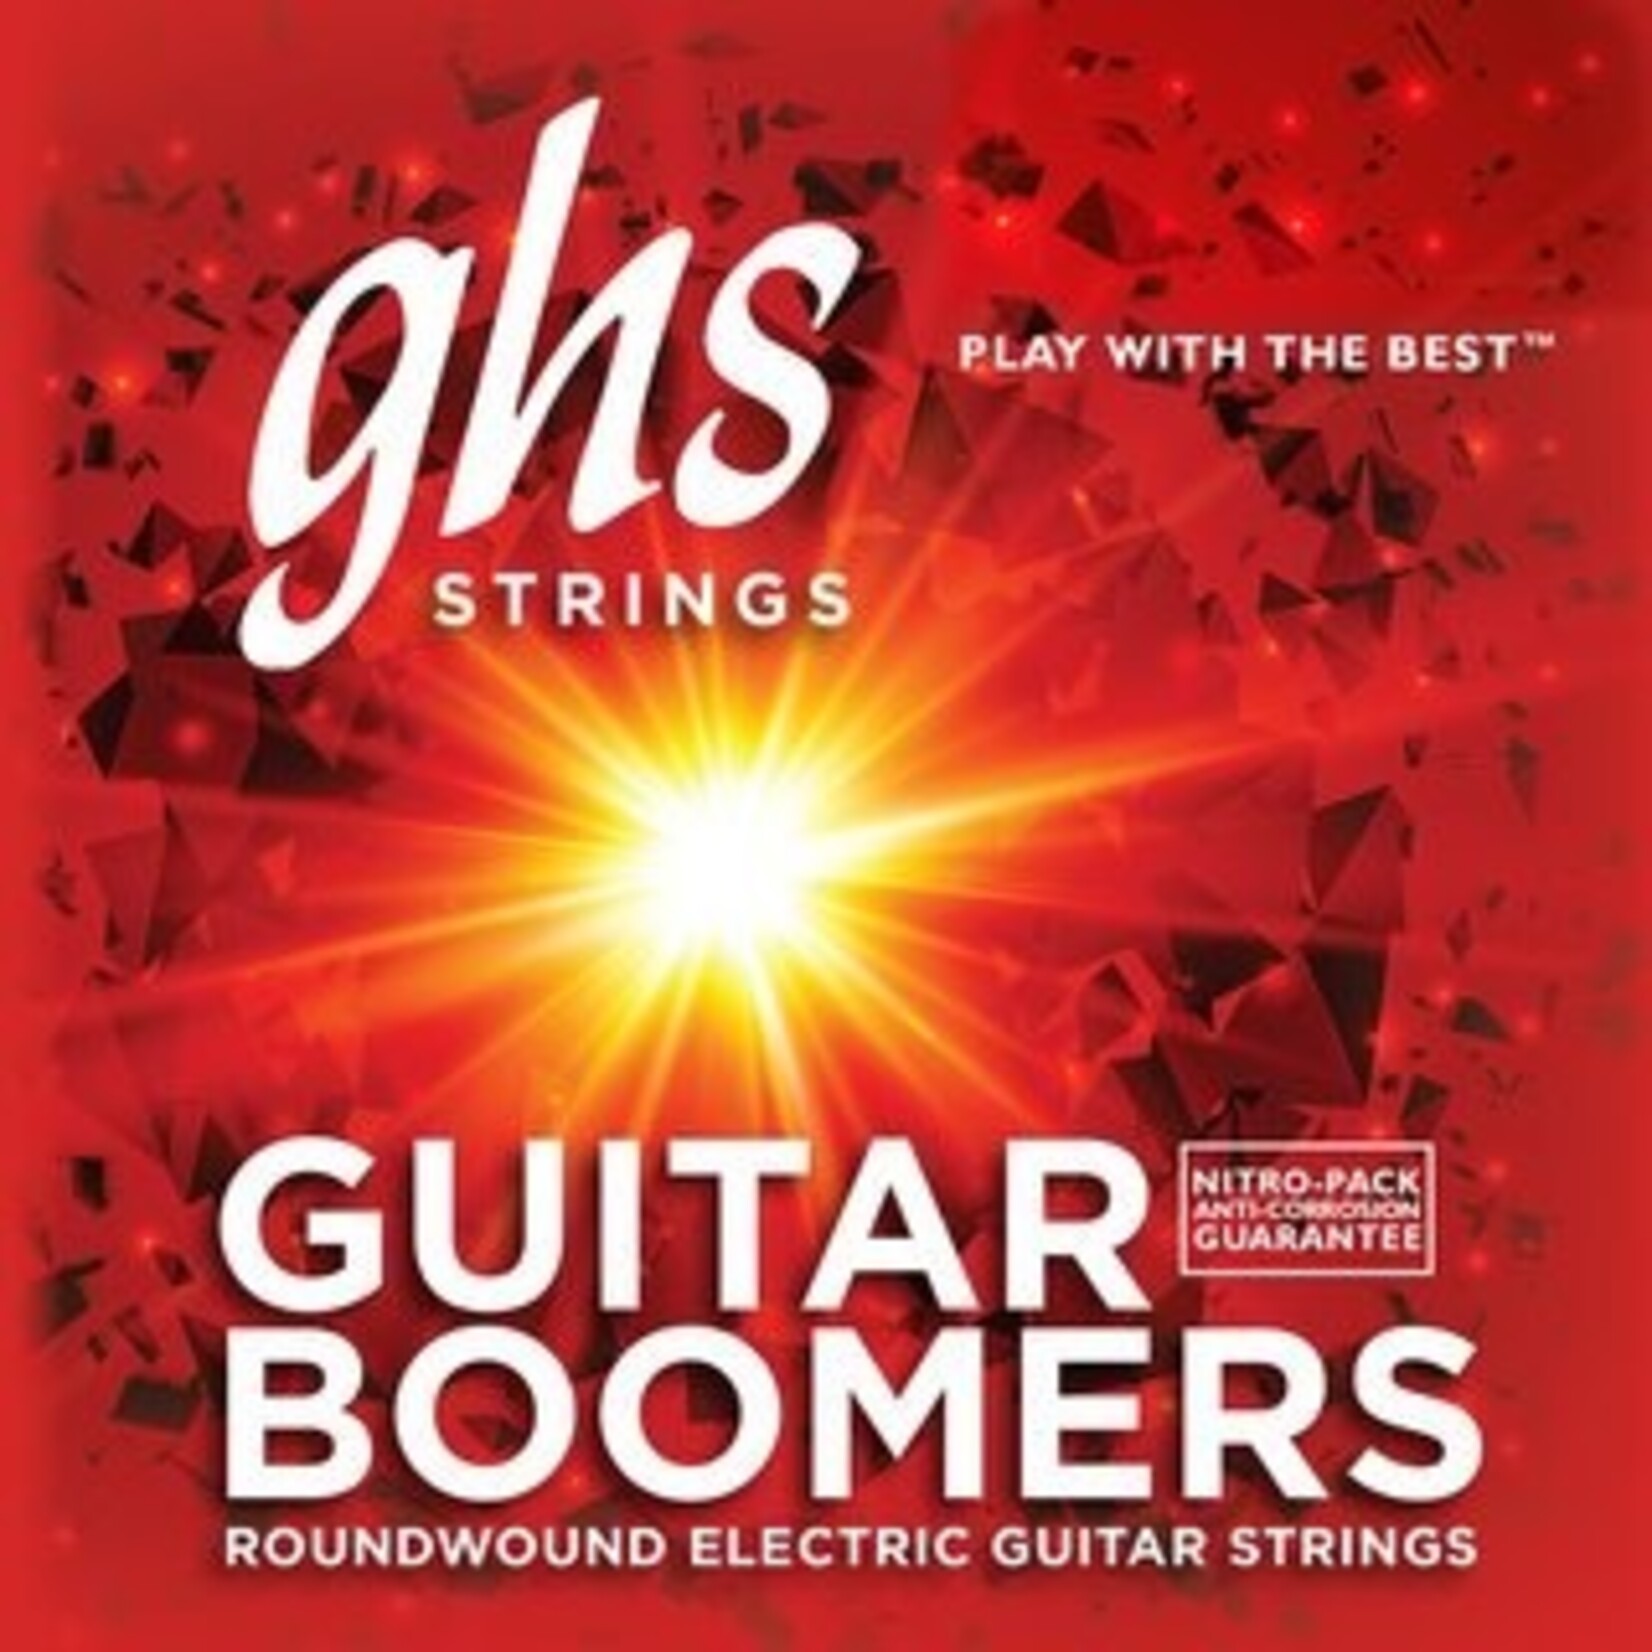 GHS GBL Boomers Light Electric Guitar Strings 10-46